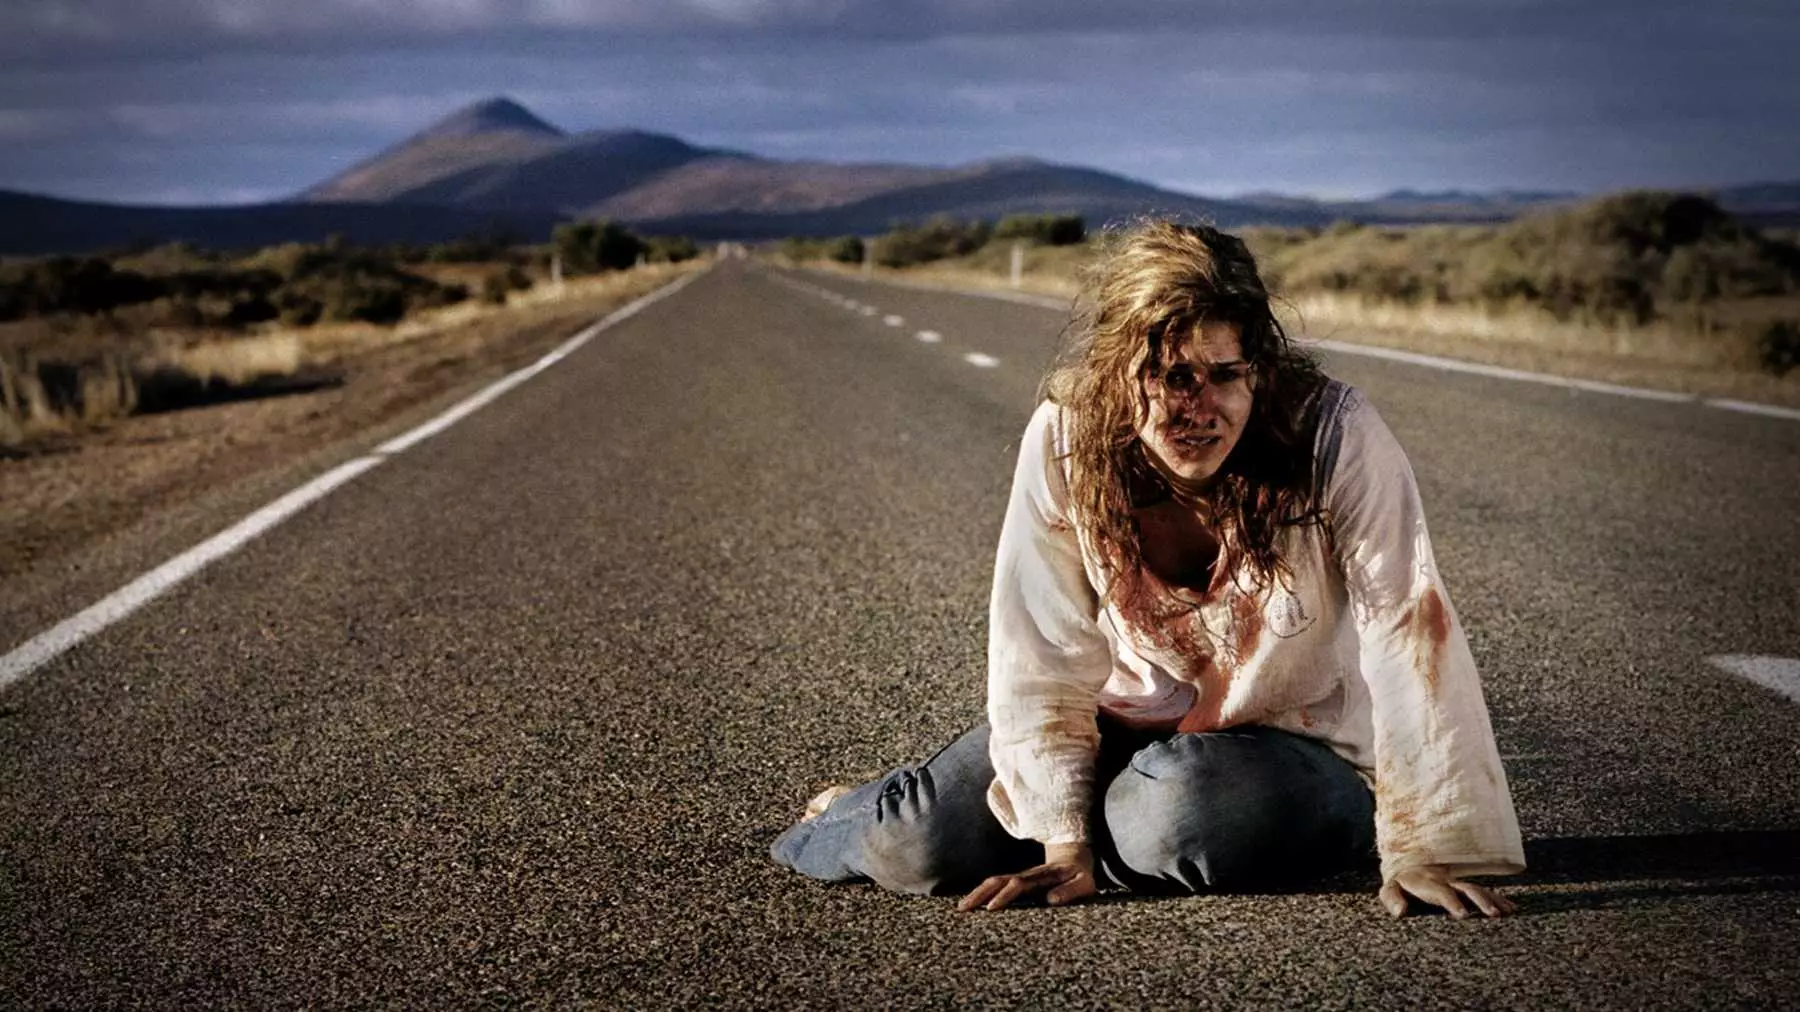 'Wolf Creek' was also set in the Aussie outback (